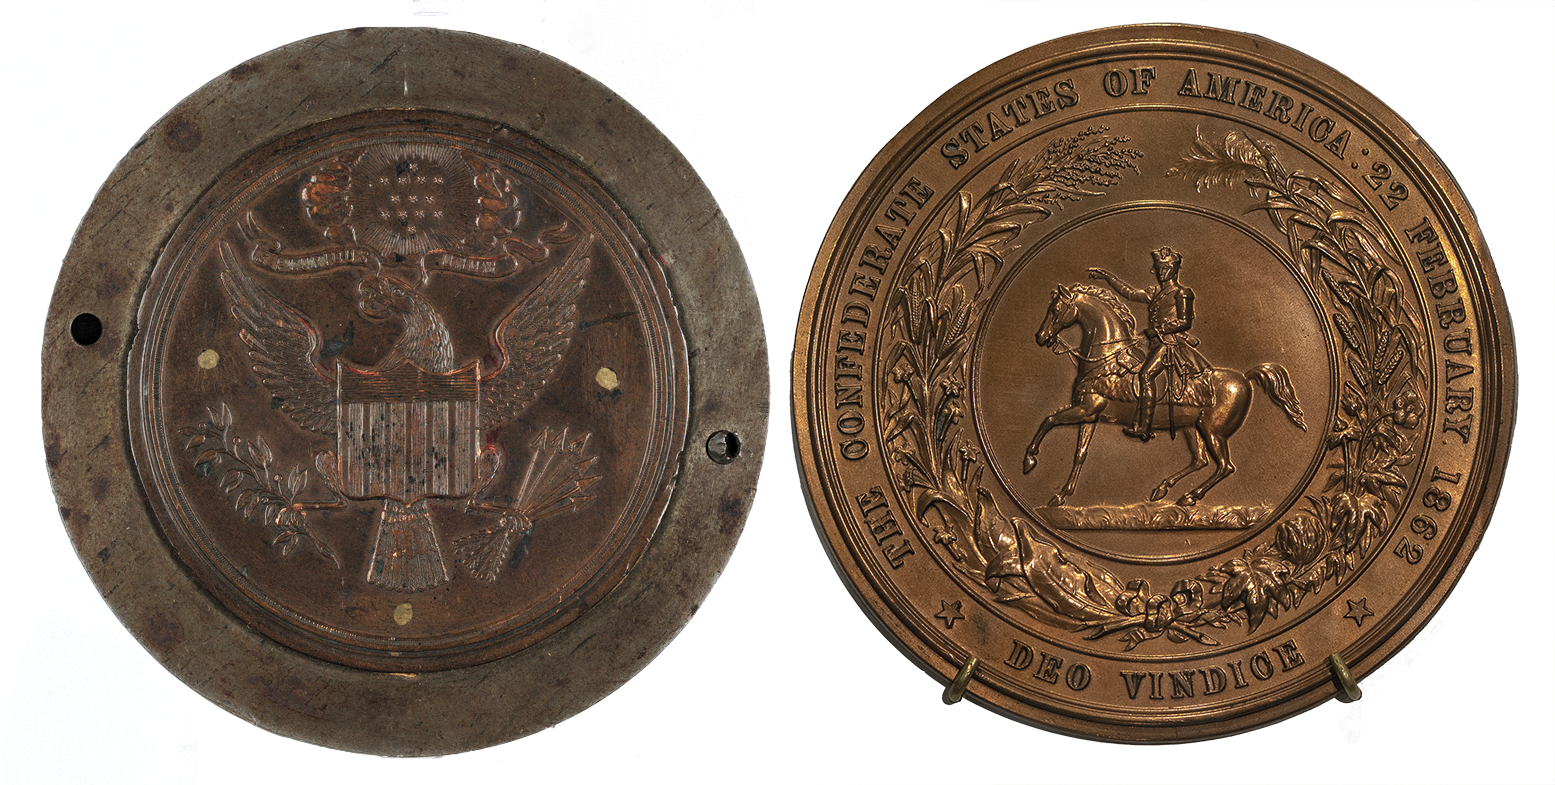 Left: Great Seal of the United States (counterdie made from the 1841 seal in 1866); right: Great Seal of the Confederate States of America, 1864, bronze (photo: Steven Zucker, CC BY-NC-SA 2.0)